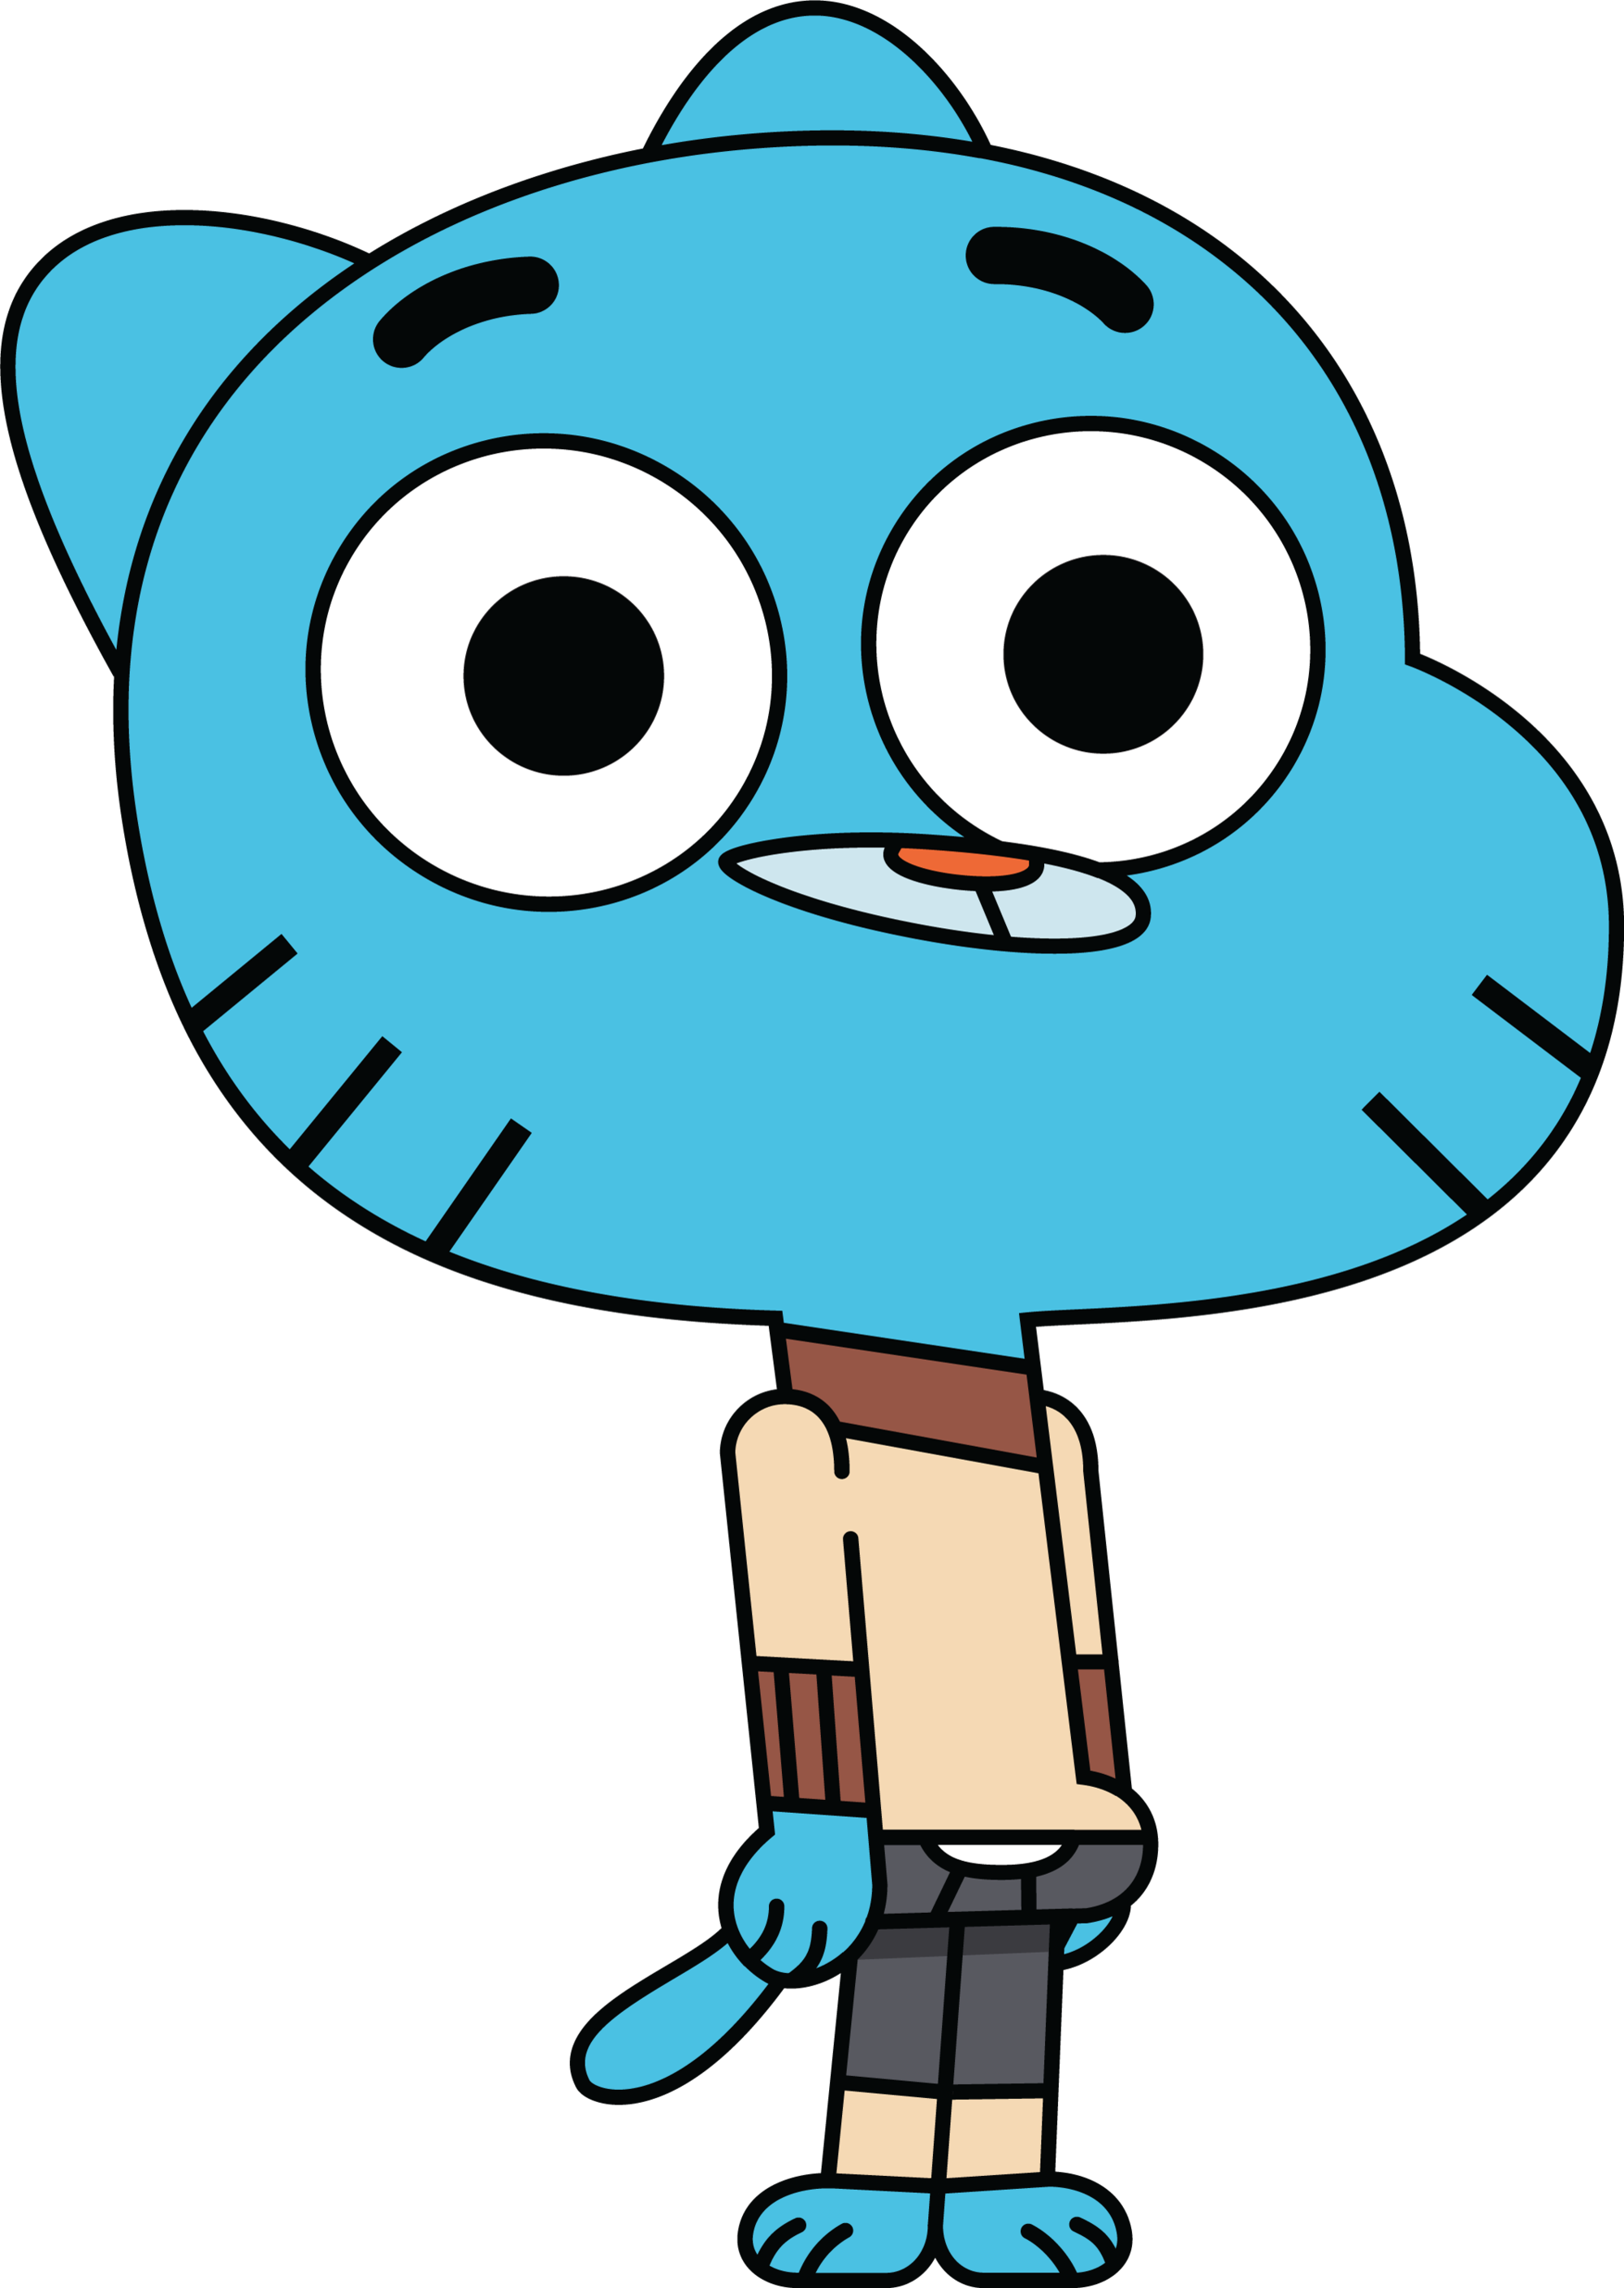 the amazing world of gumball episode about the other kids in school